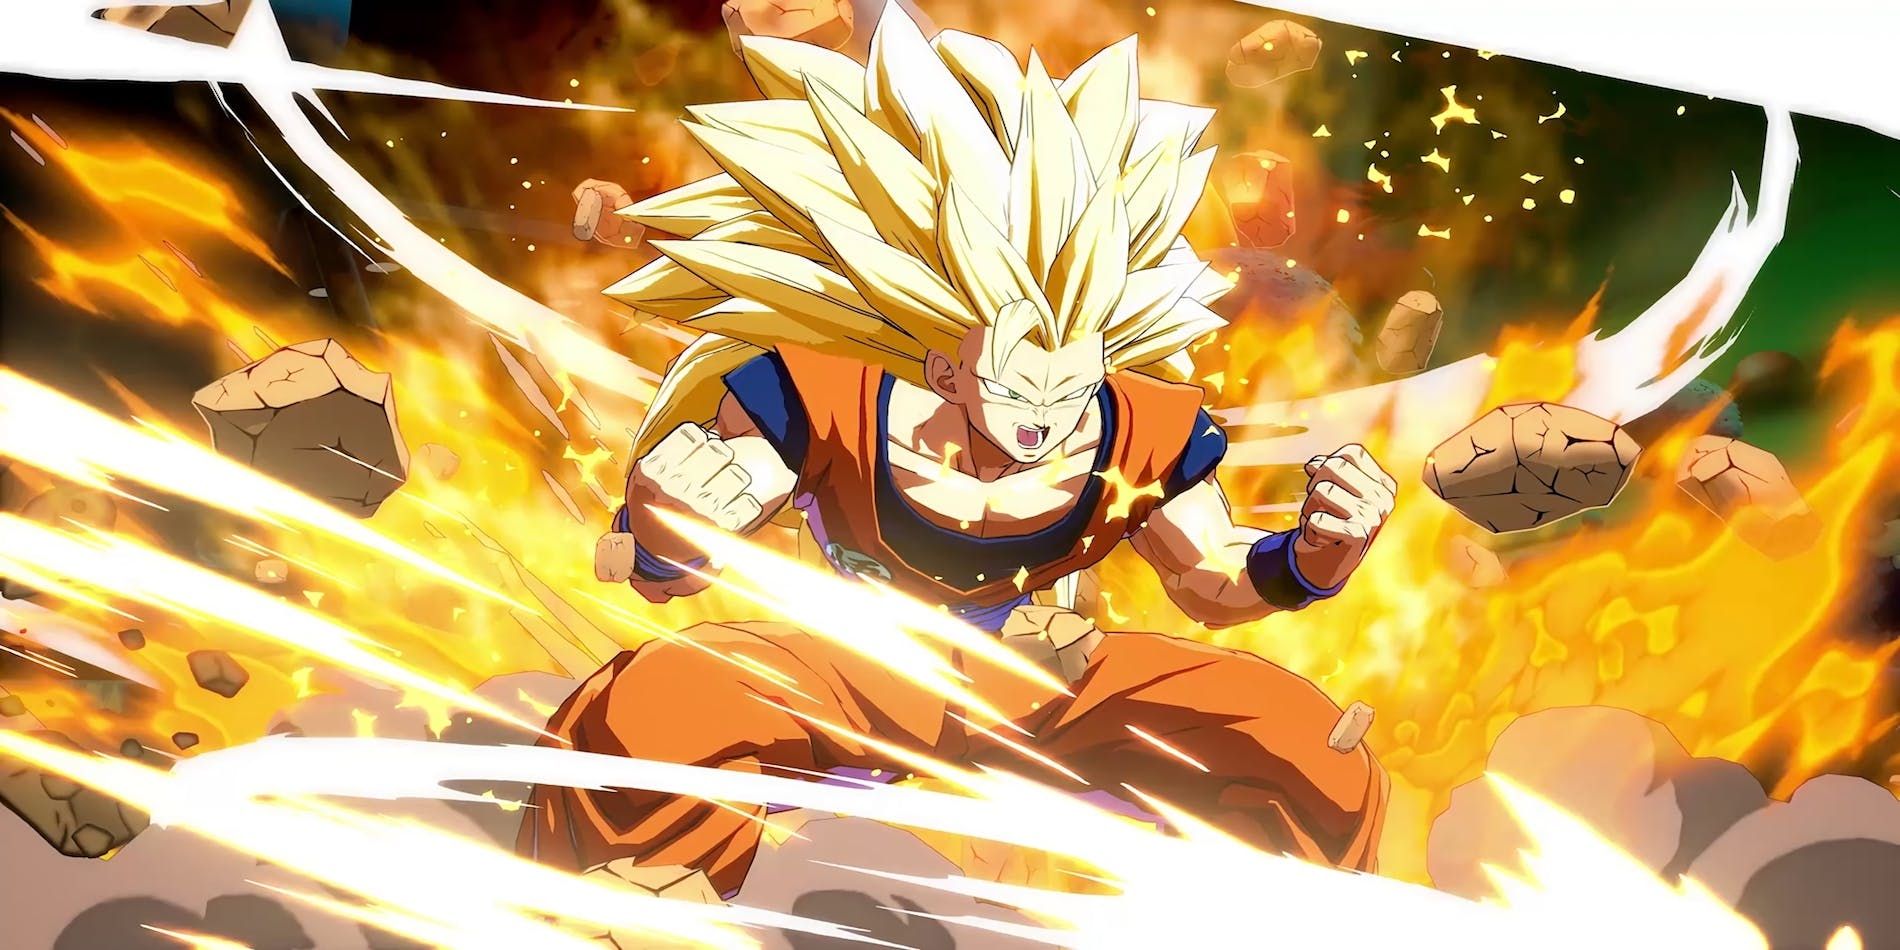 Was Super Saiyan 3 a rather silly form in terms of design? Could it have  been better? - Quora